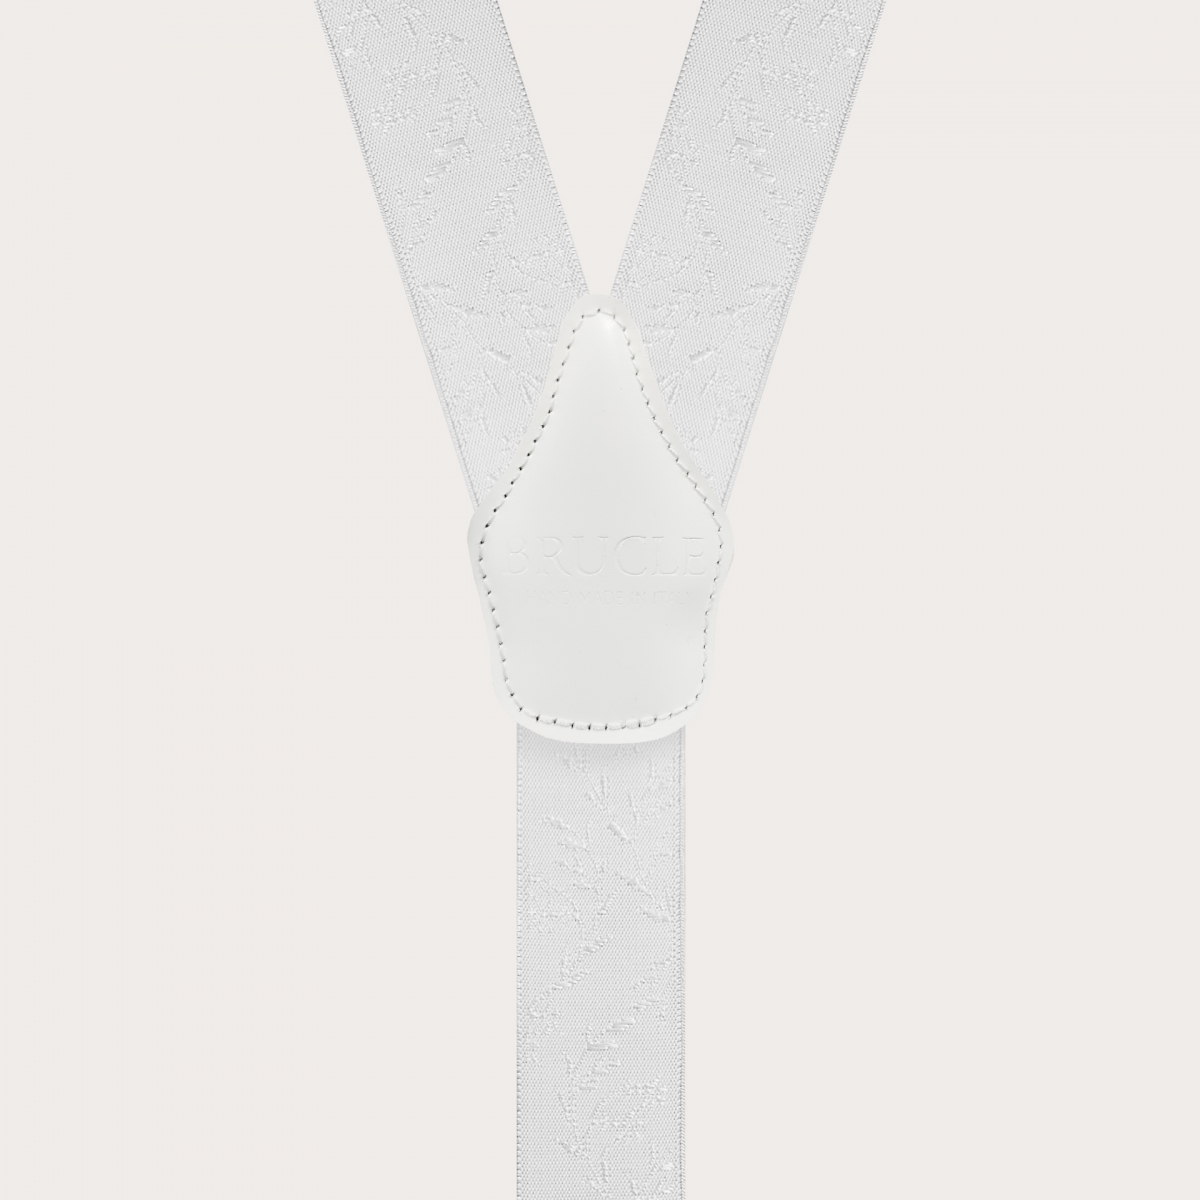 BRUCLE Nickel-free white ceremony suspenders with tone-on-tone pattern